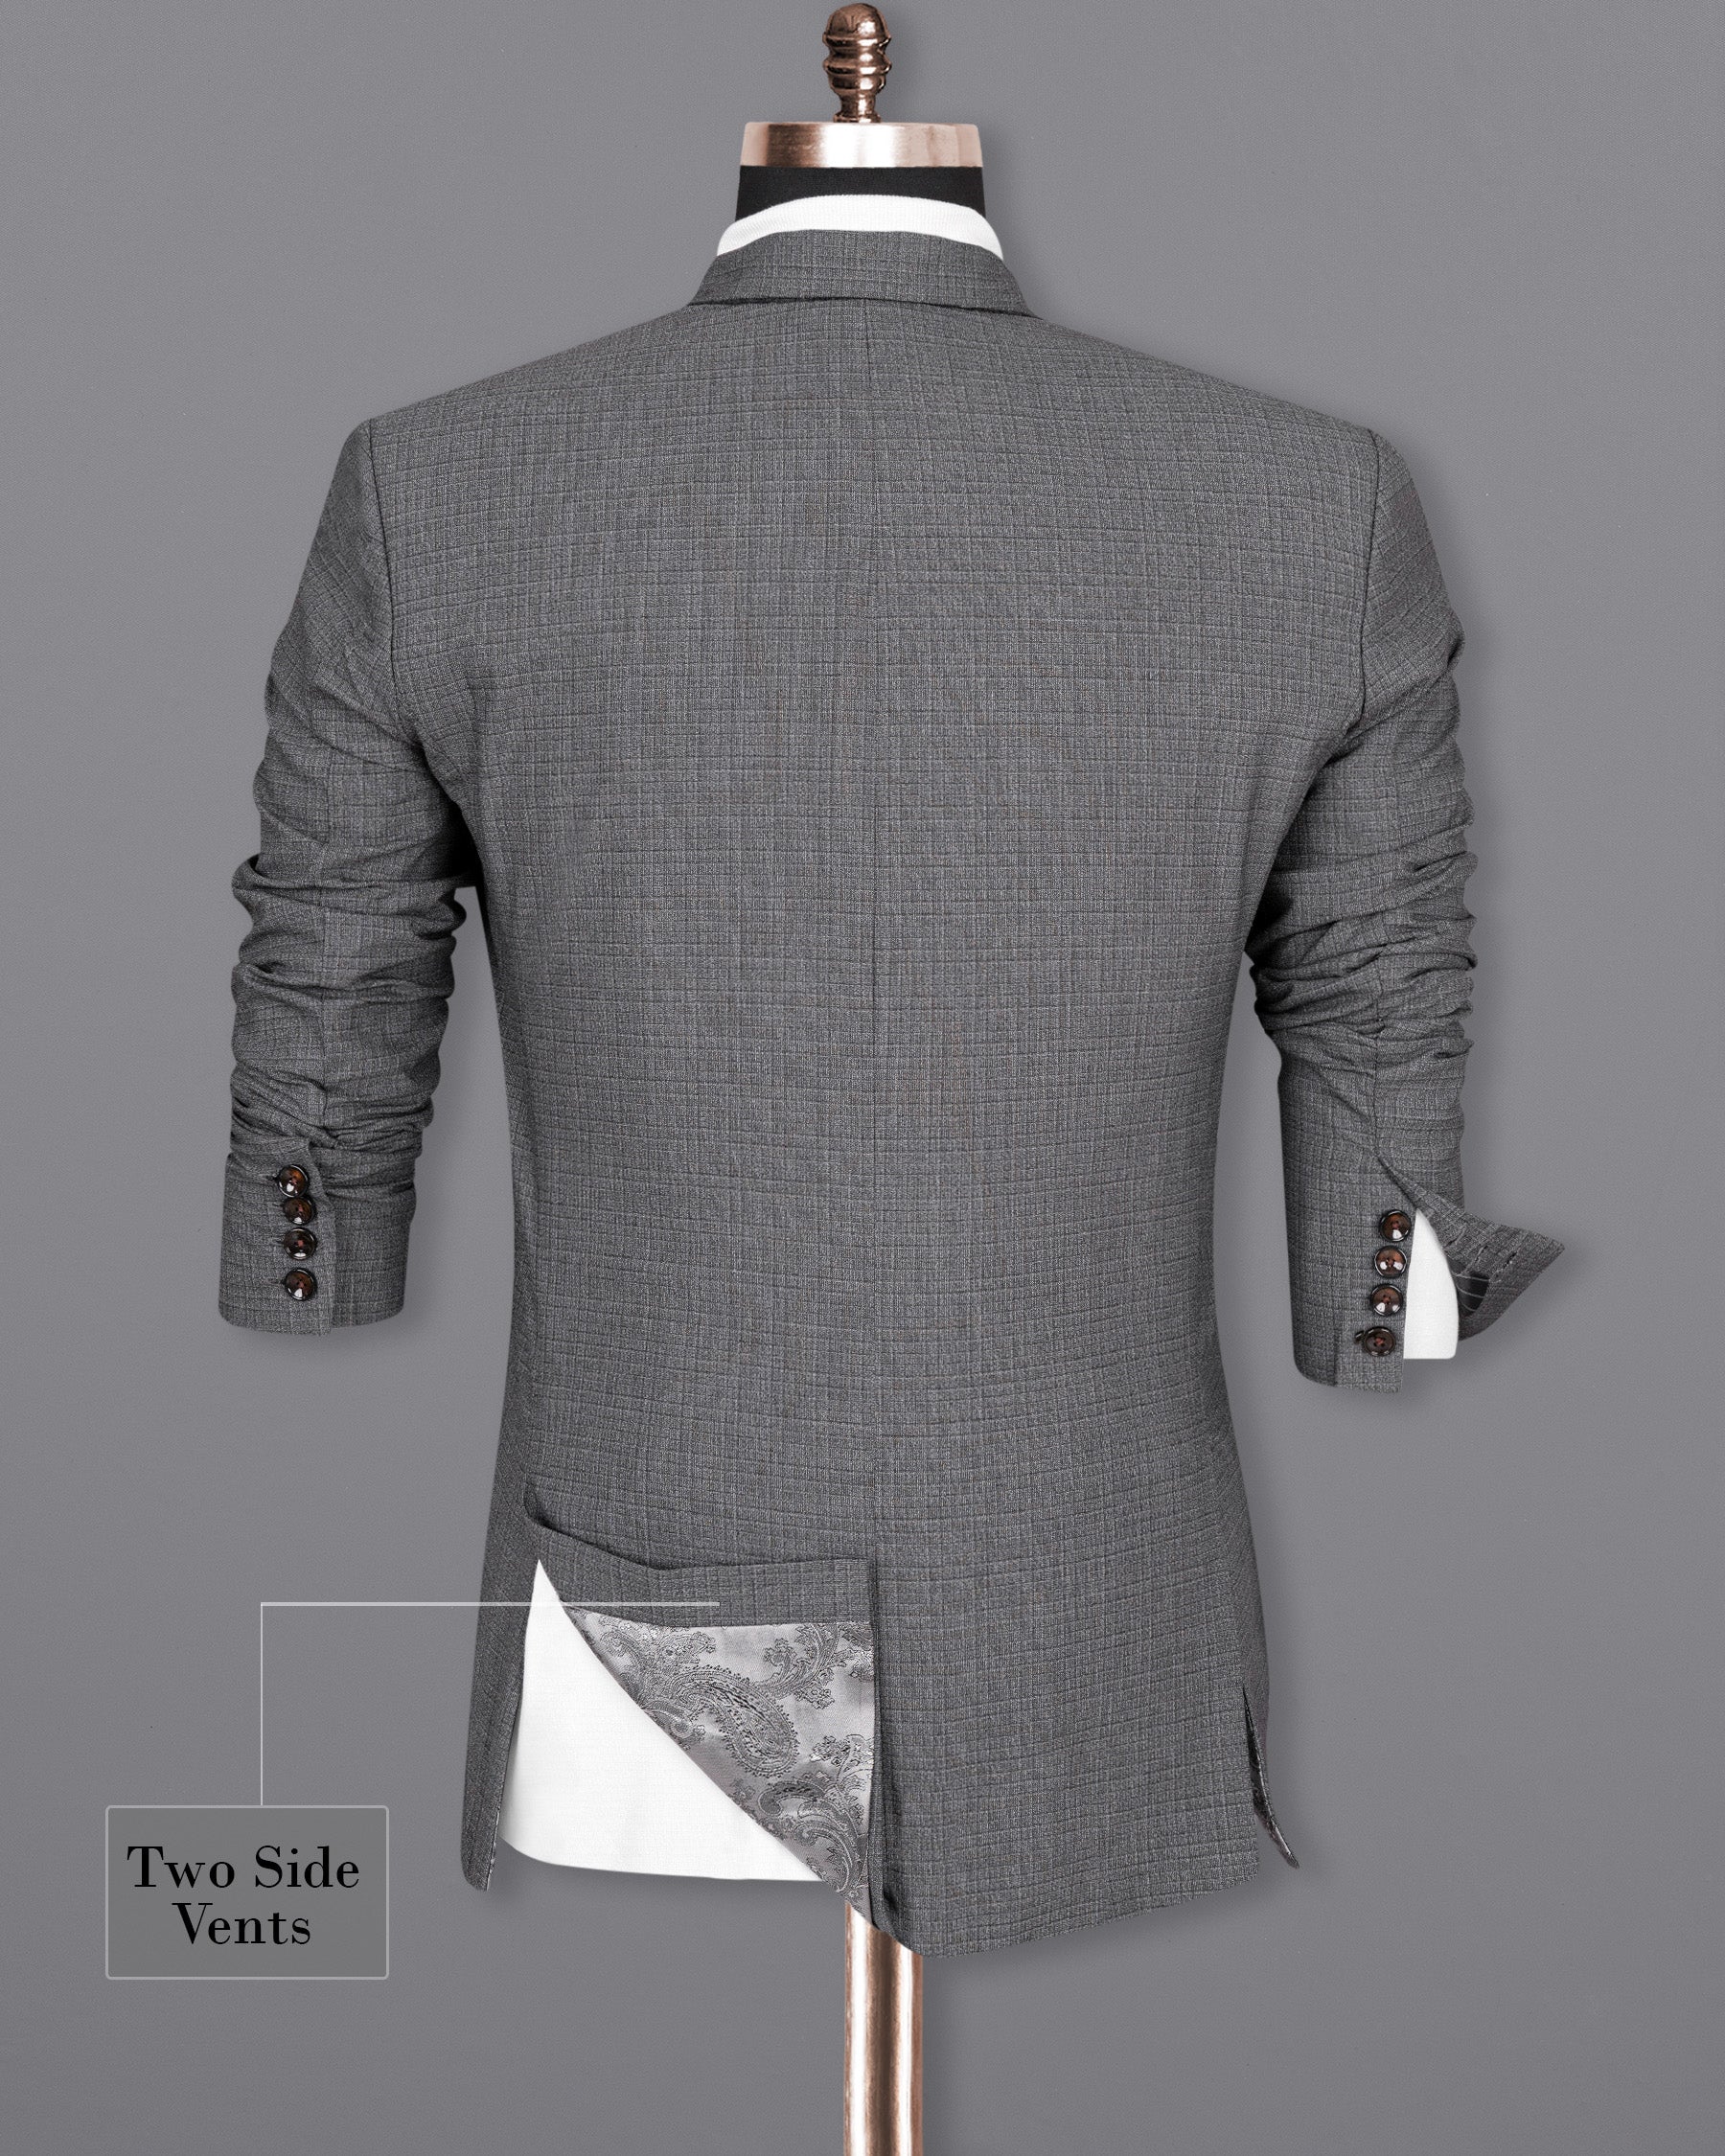 Fuscous Gray Chequered Double Breasted Wool Rich Sports Blazer BL1448-DB-PP-36,BL1448-DB-PP-38,BL1448-DB-PP-40,BL1448-DB-PP-42,BL1448-DB-PP-44,BL1448-DB-PP-46,BL1448-DB-PP-48,BL1448-DB-PP-50,BL1448-DB-PP-52,BL1448-DB-PP-54,BL1448-DB-PP-56,BL1448-DB-PP-58,BL1448-DB-PP-60